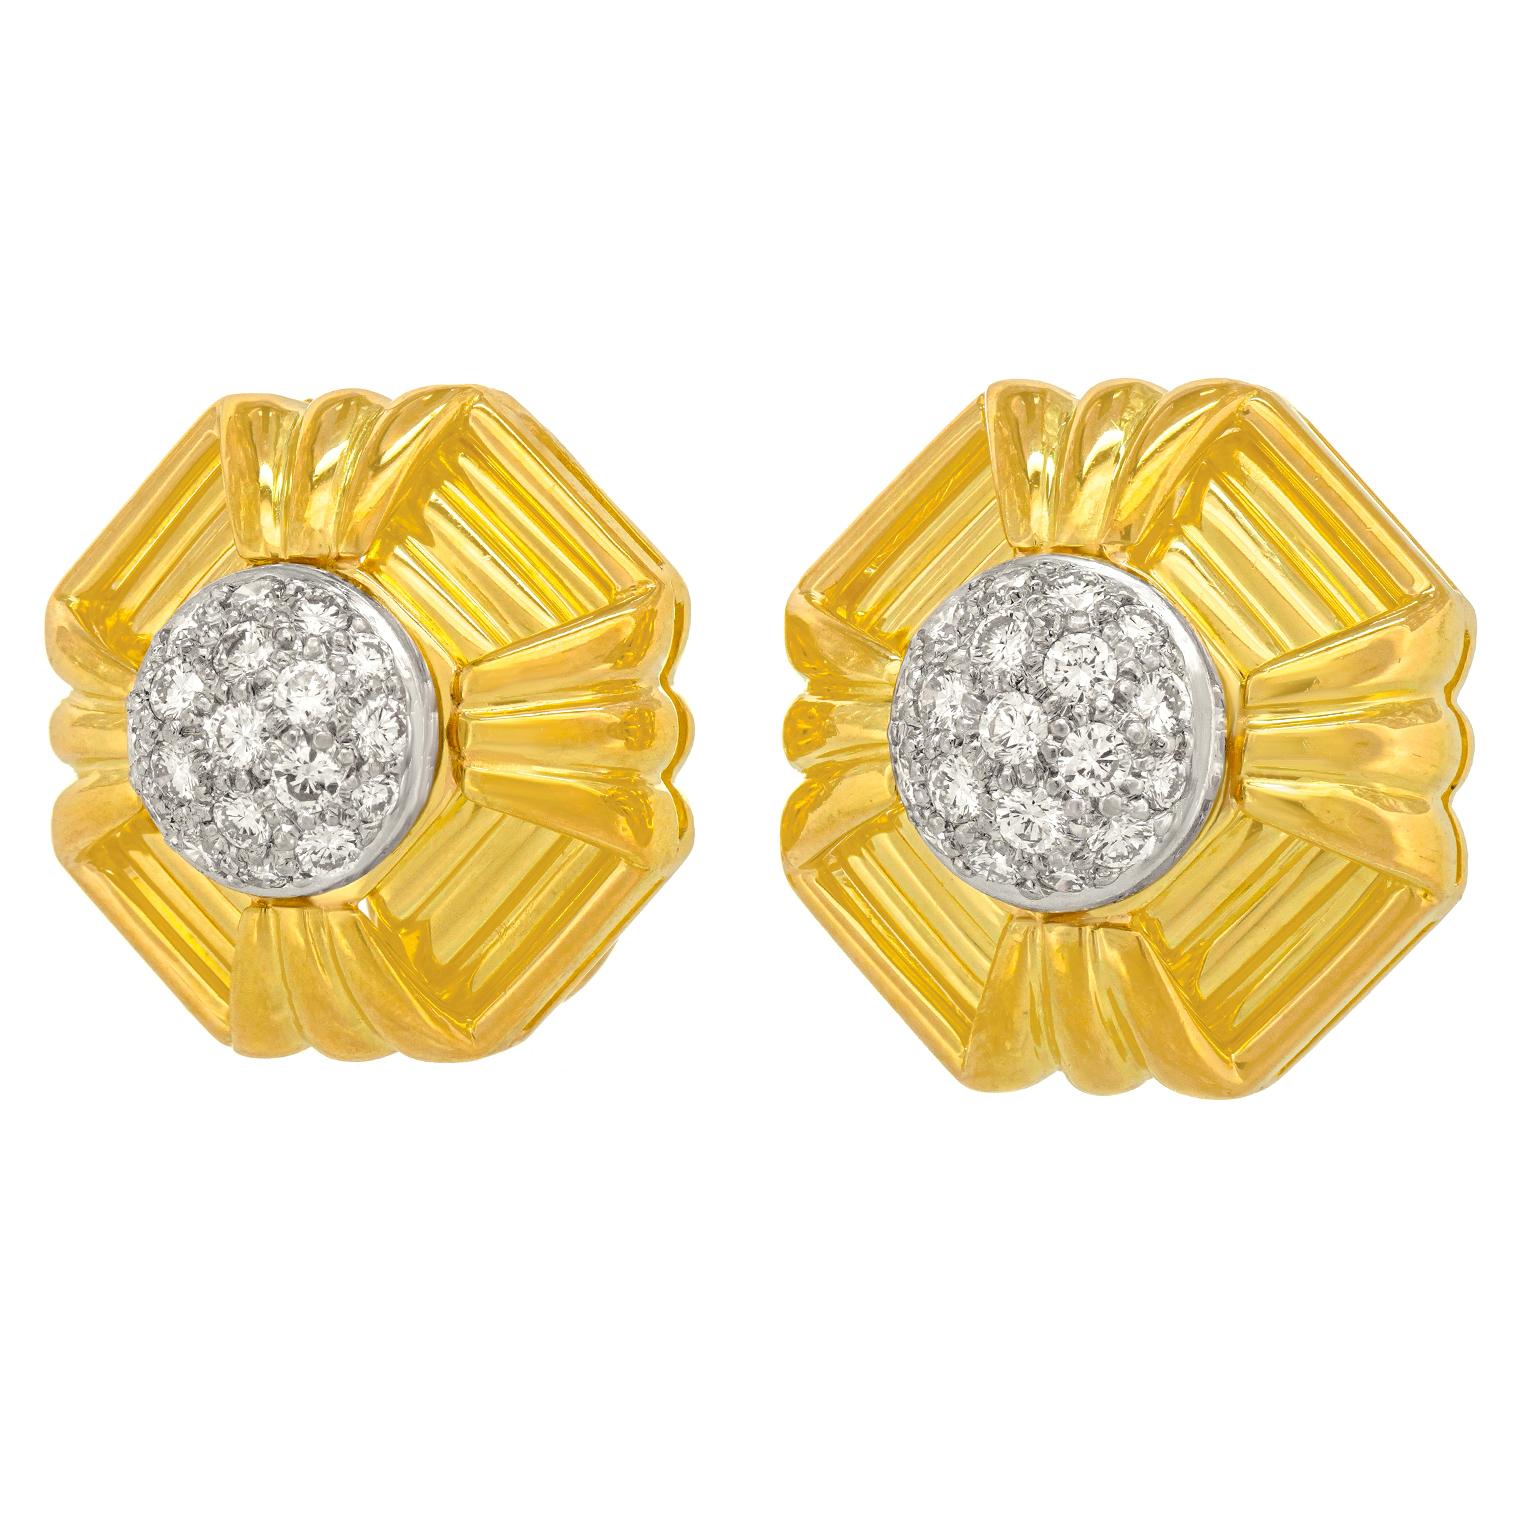 Cartier Sixties Diamond and Gold Earrings For Sale 2